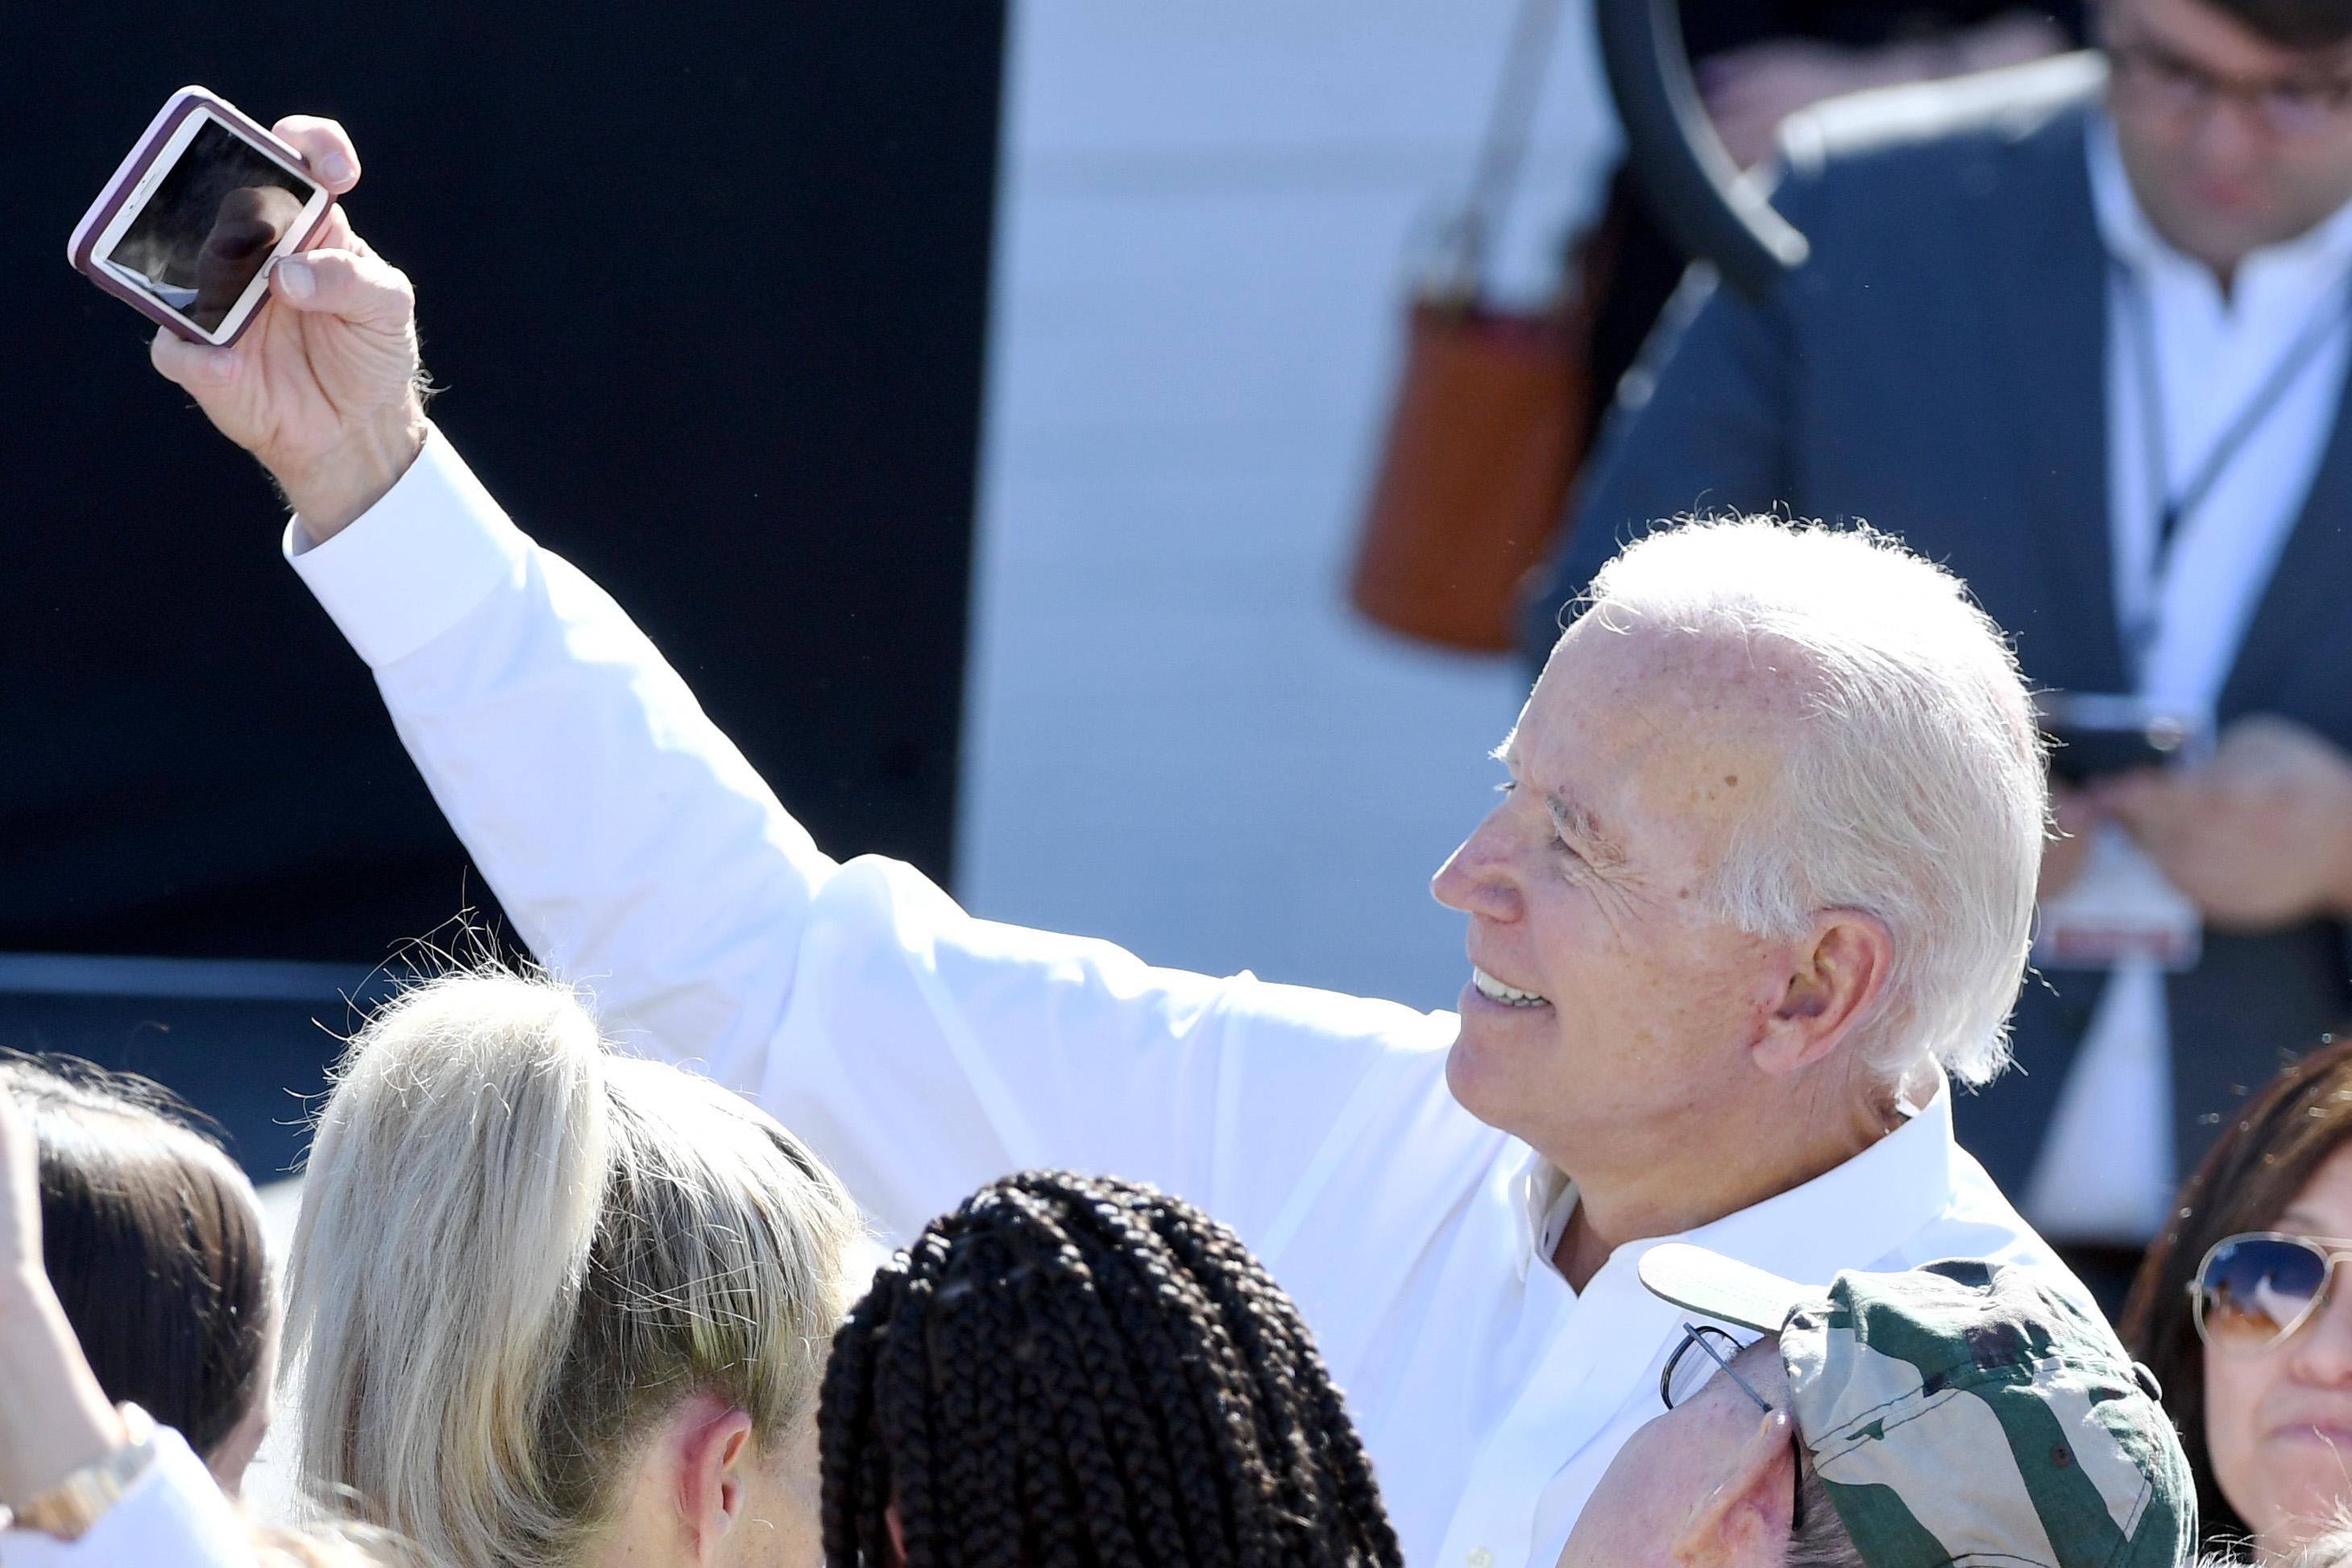 Biden raises his arm, holding a phone, to take a selfie in a crowd of people.